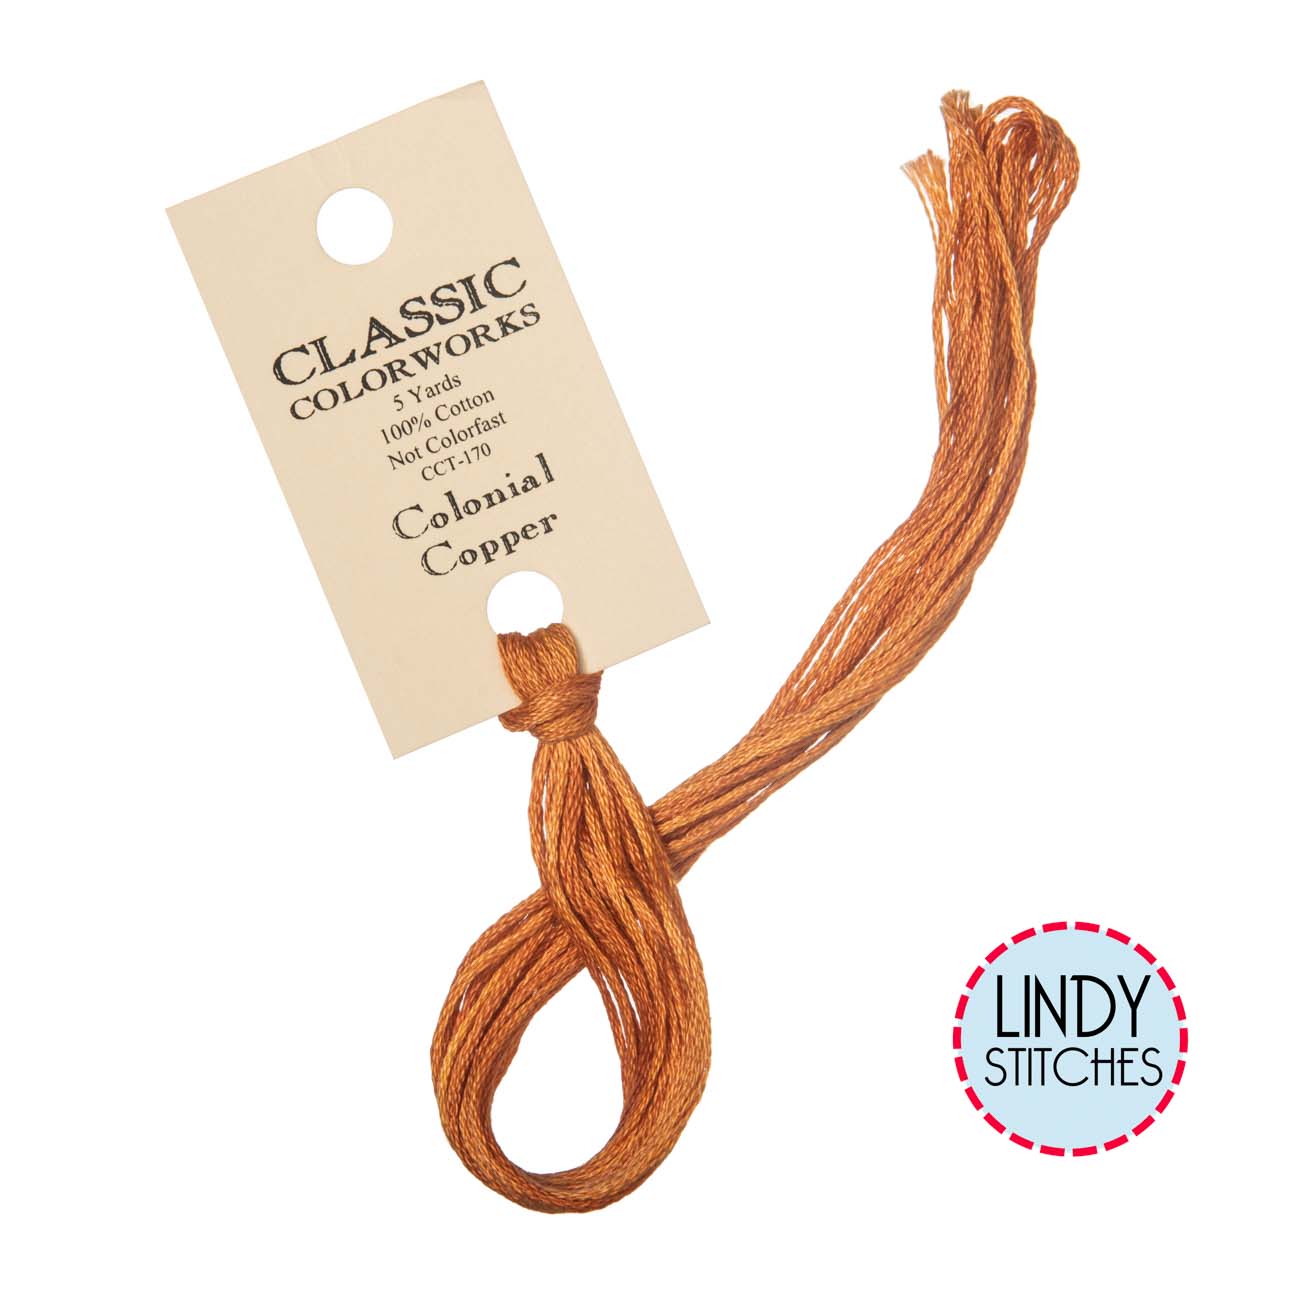 Colonial Copper Classic Colorworks Floss Hand Dyed Cotton Skein